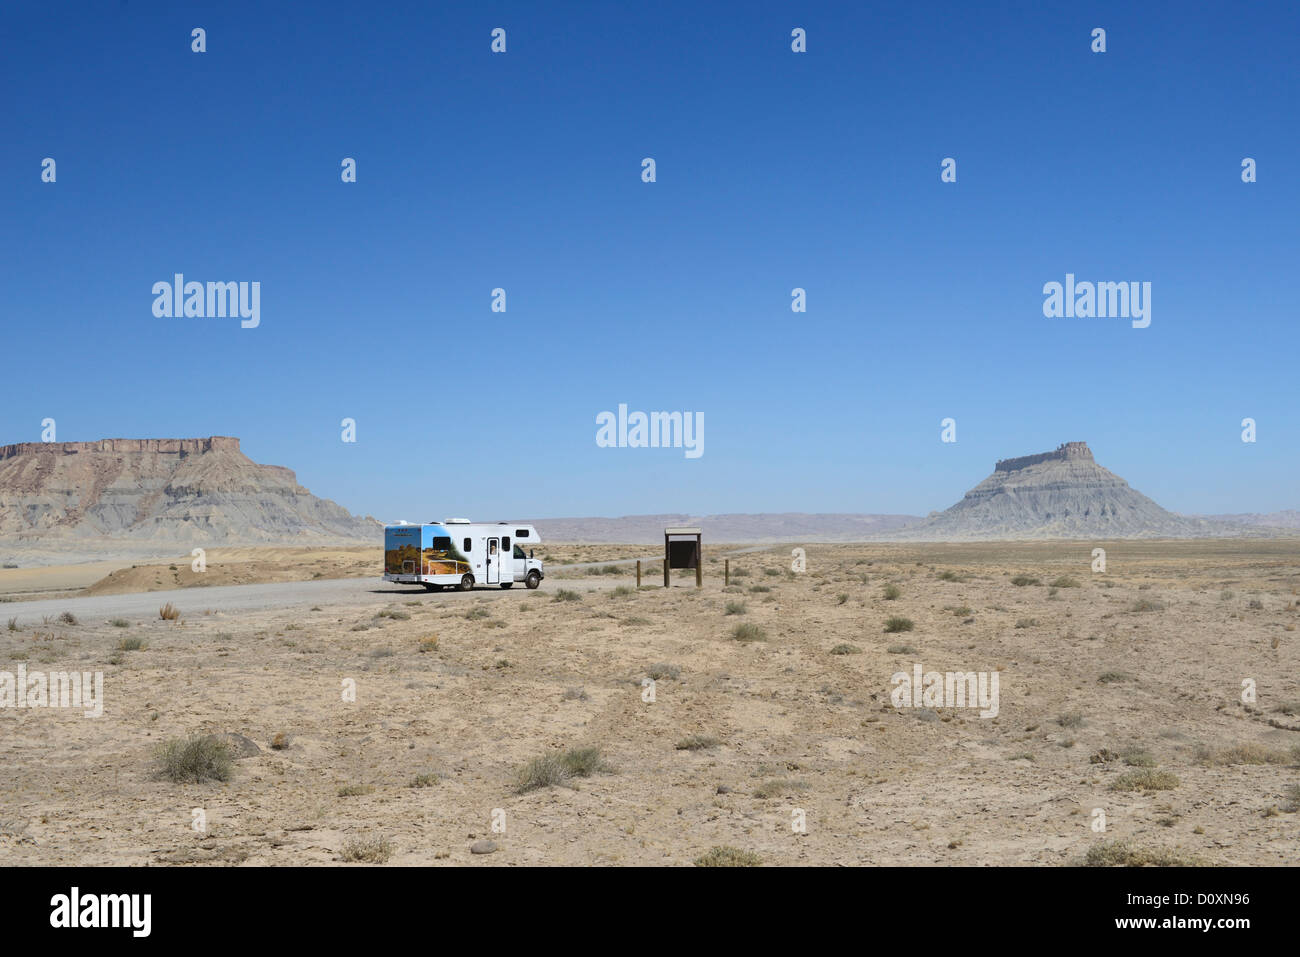 America, USA, United States, Colorado Plateau, Utah, Factory Butte, erosion, desert, motor home, RV, camping, Caineville Stock Photo